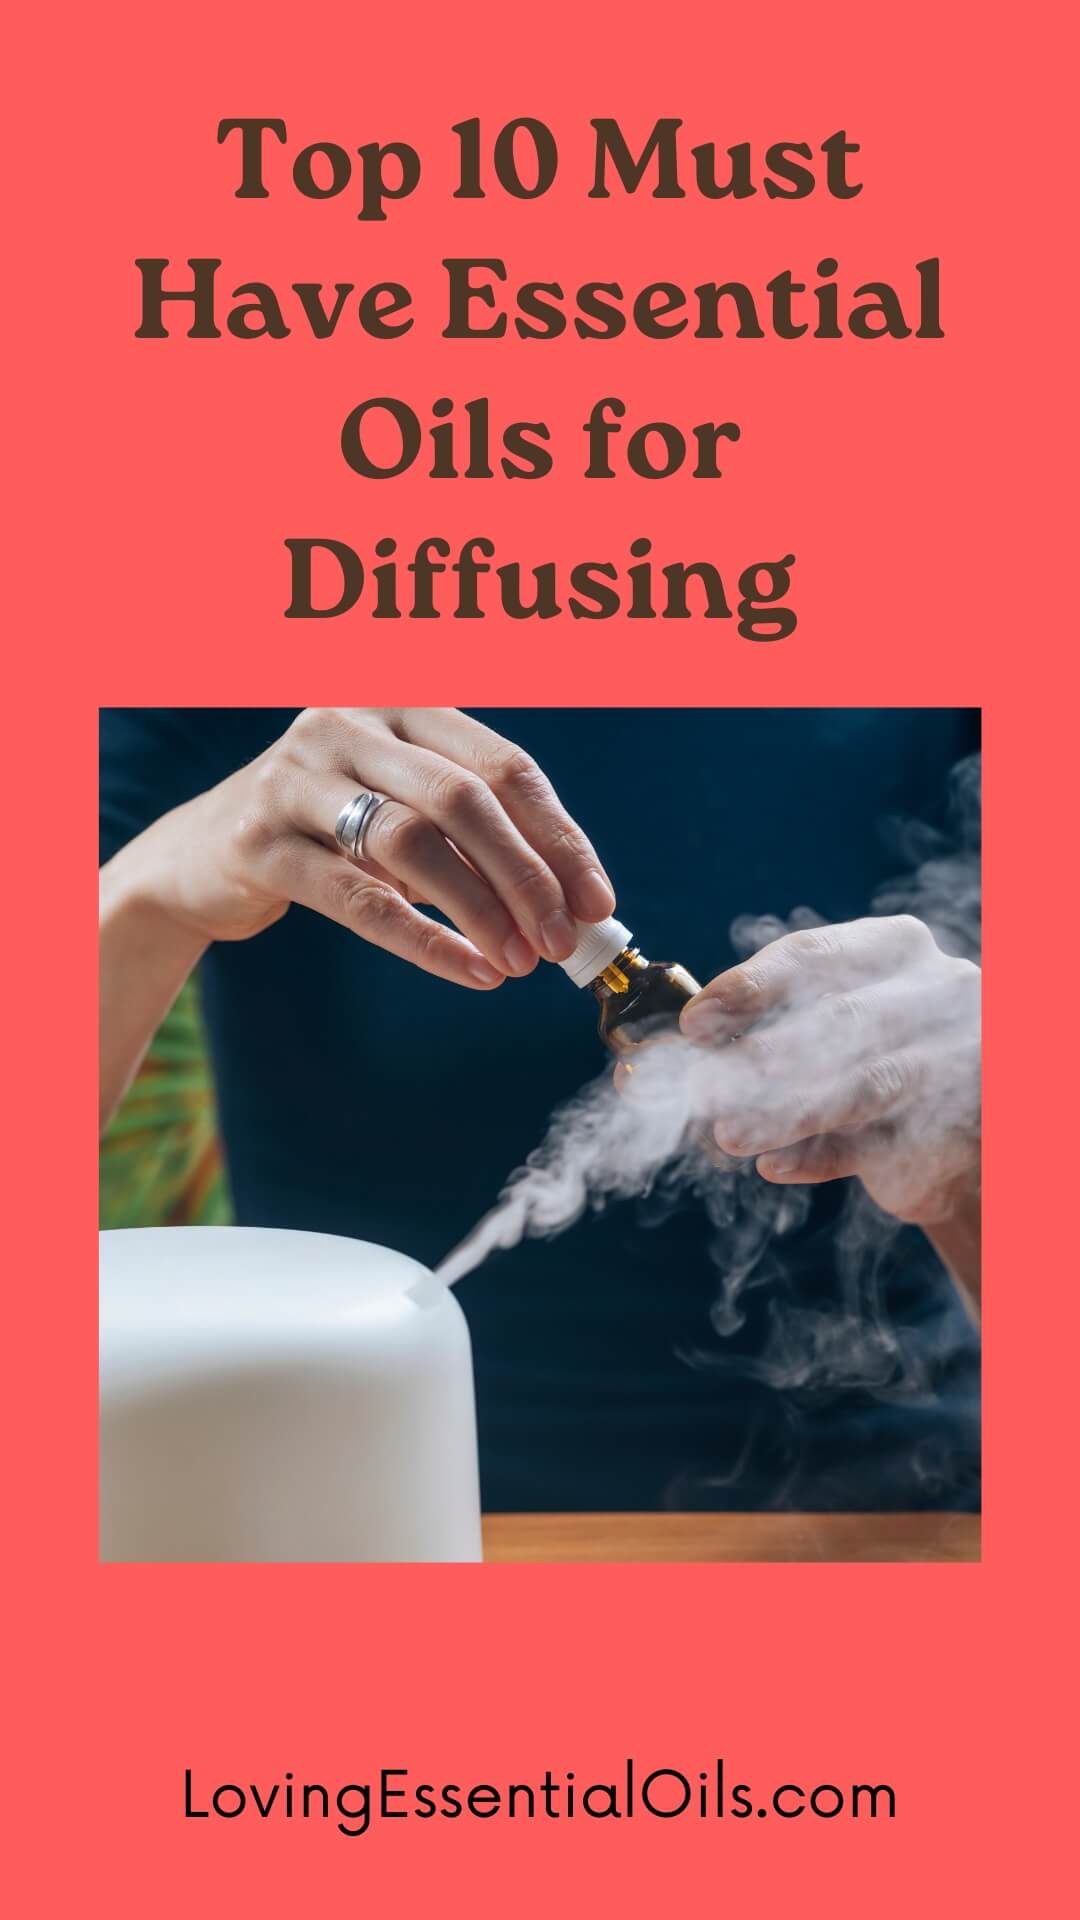 Best Essential Oils for Diffusing by Loving Essential Oils